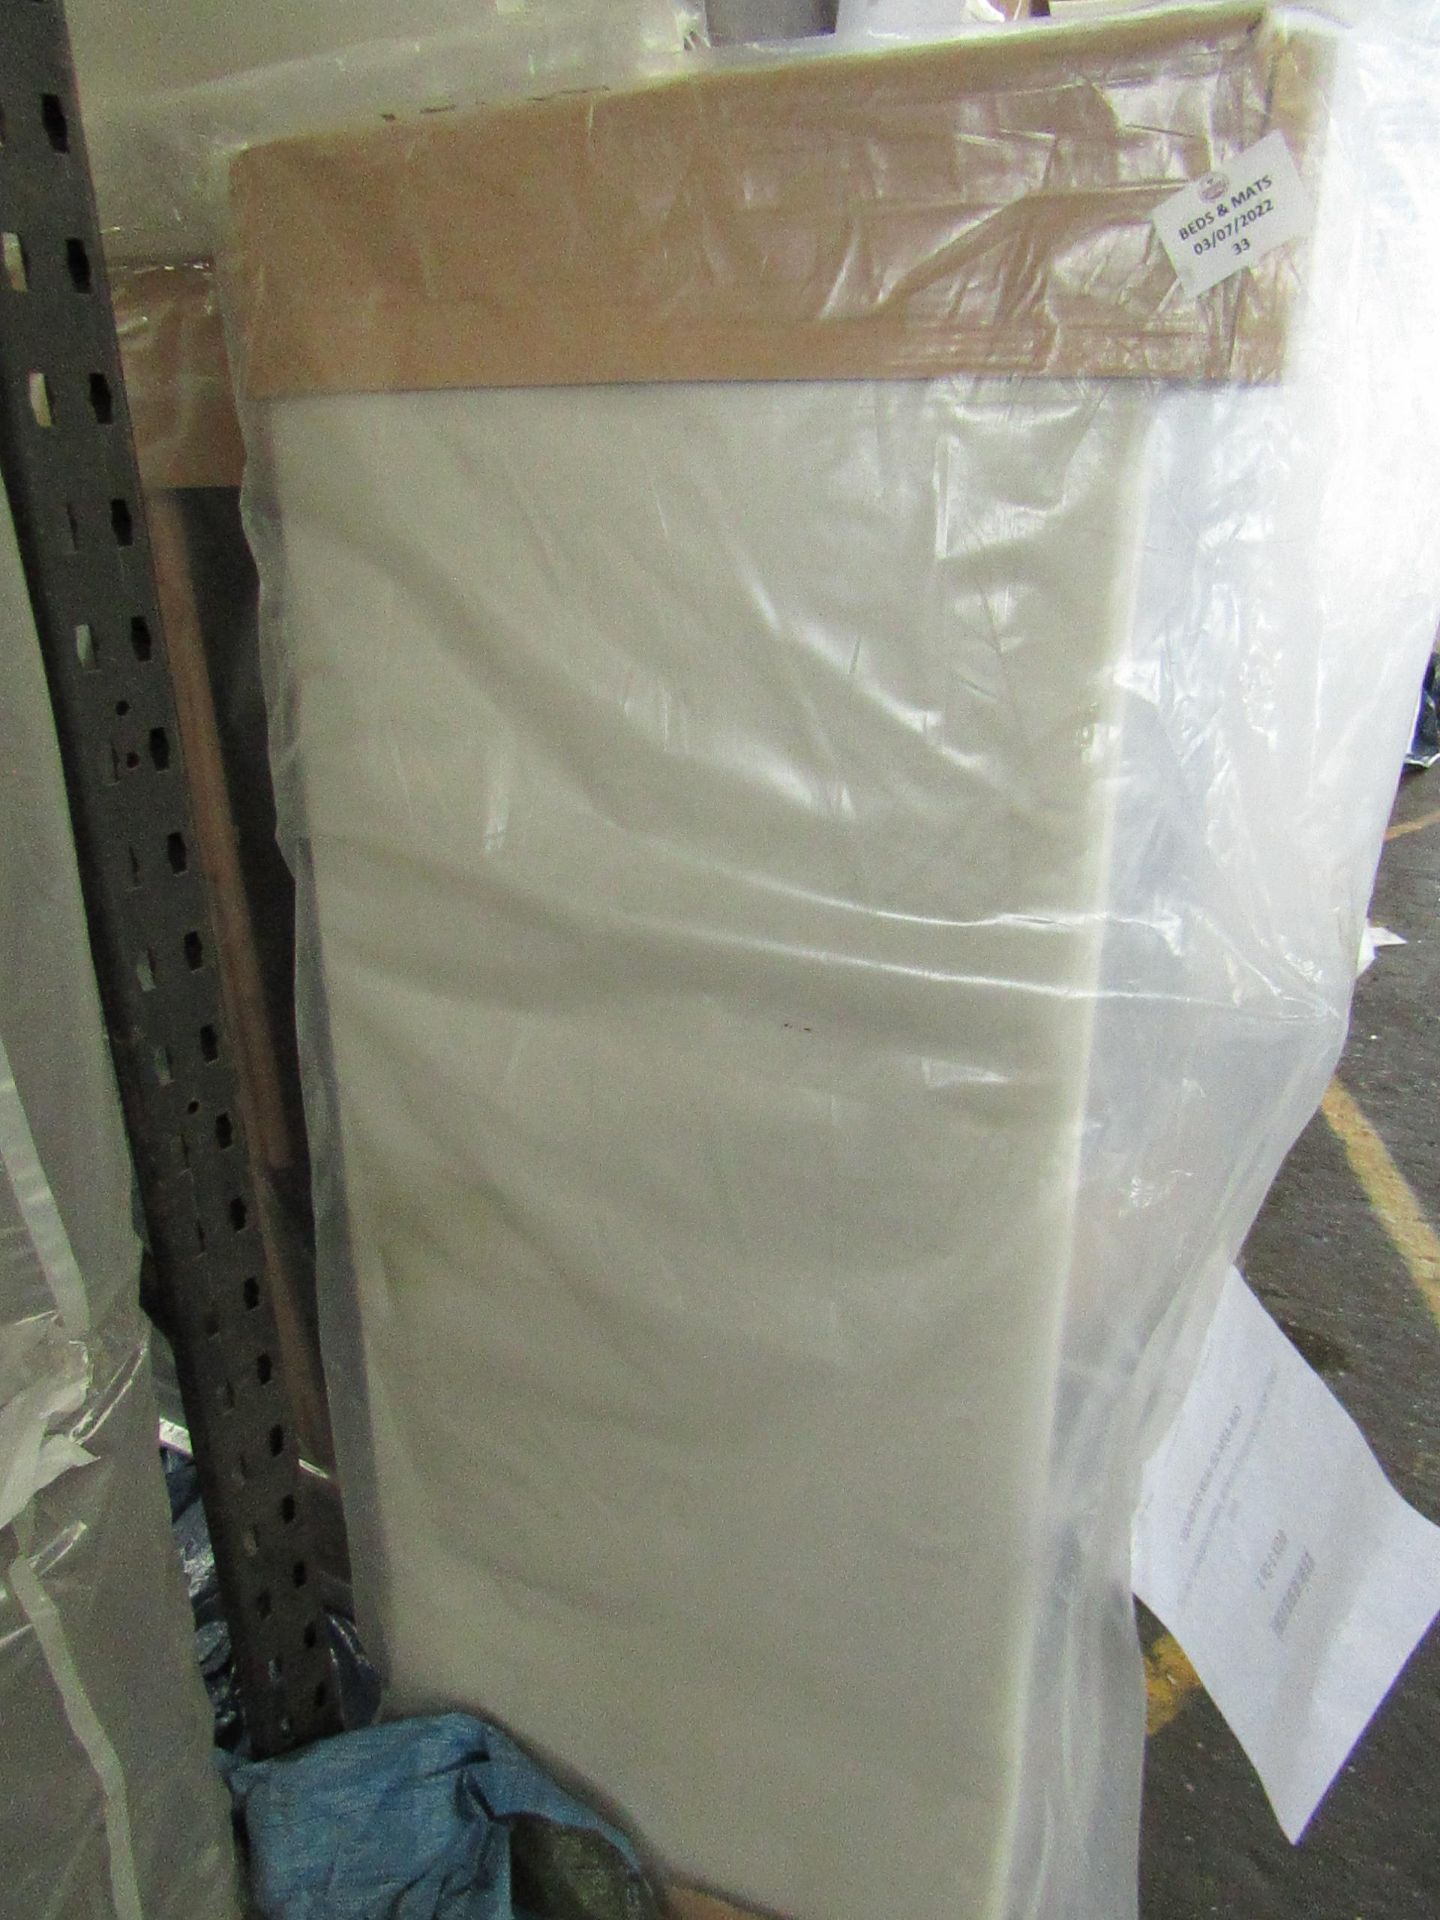 | 1X | SILENTNIGHT ESSENTIAL JASMINE HEADBOARD 5FT KING SIZE DOVE | GOOD CONDITION & PACKAGED | - Image 2 of 2